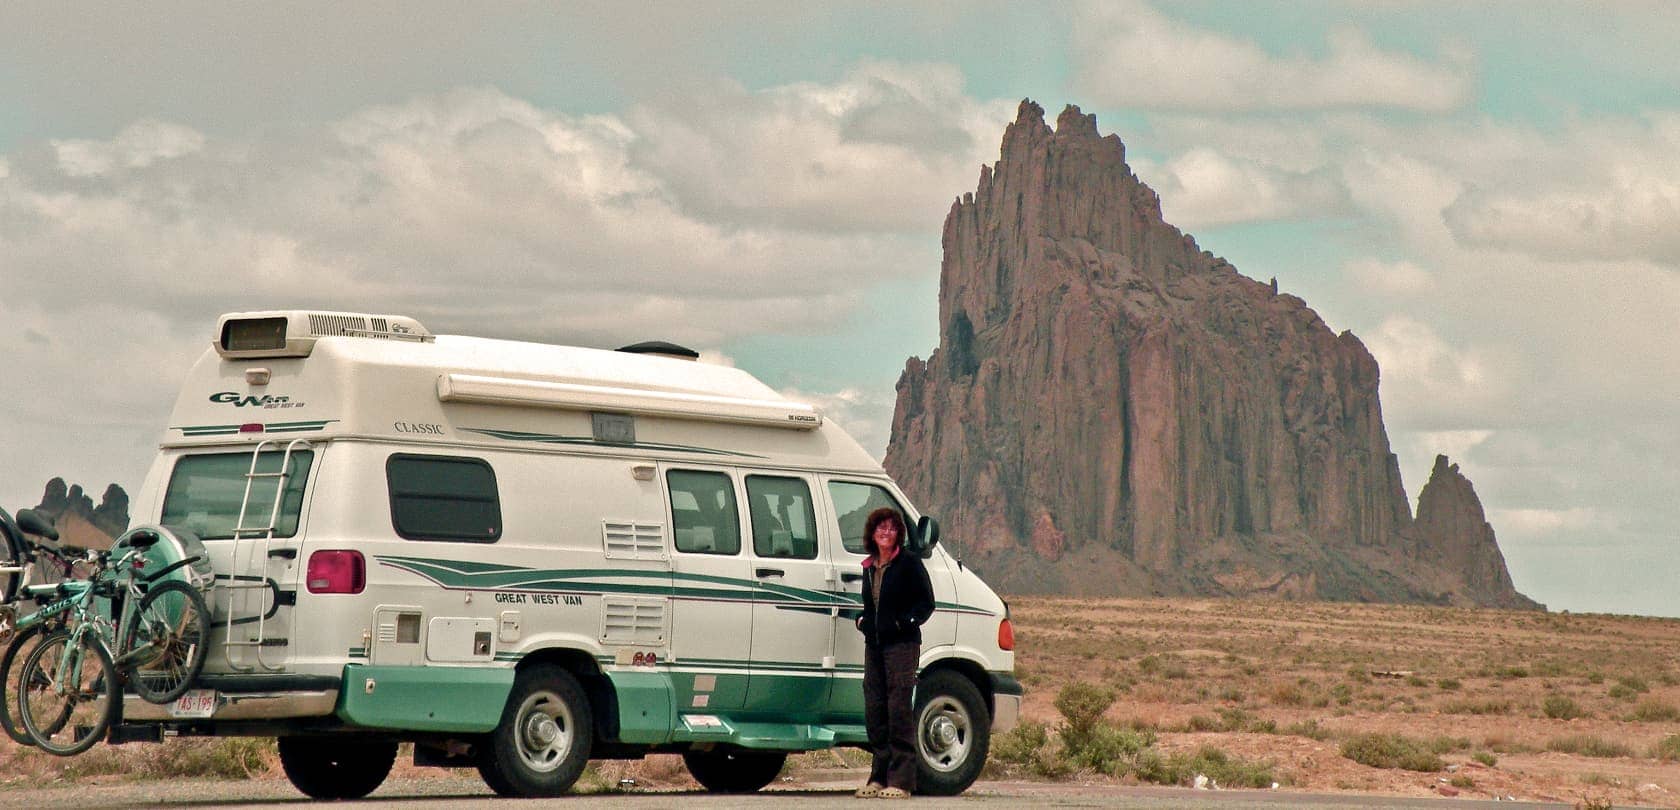 Woman standing next to van with large natural rock structure in background